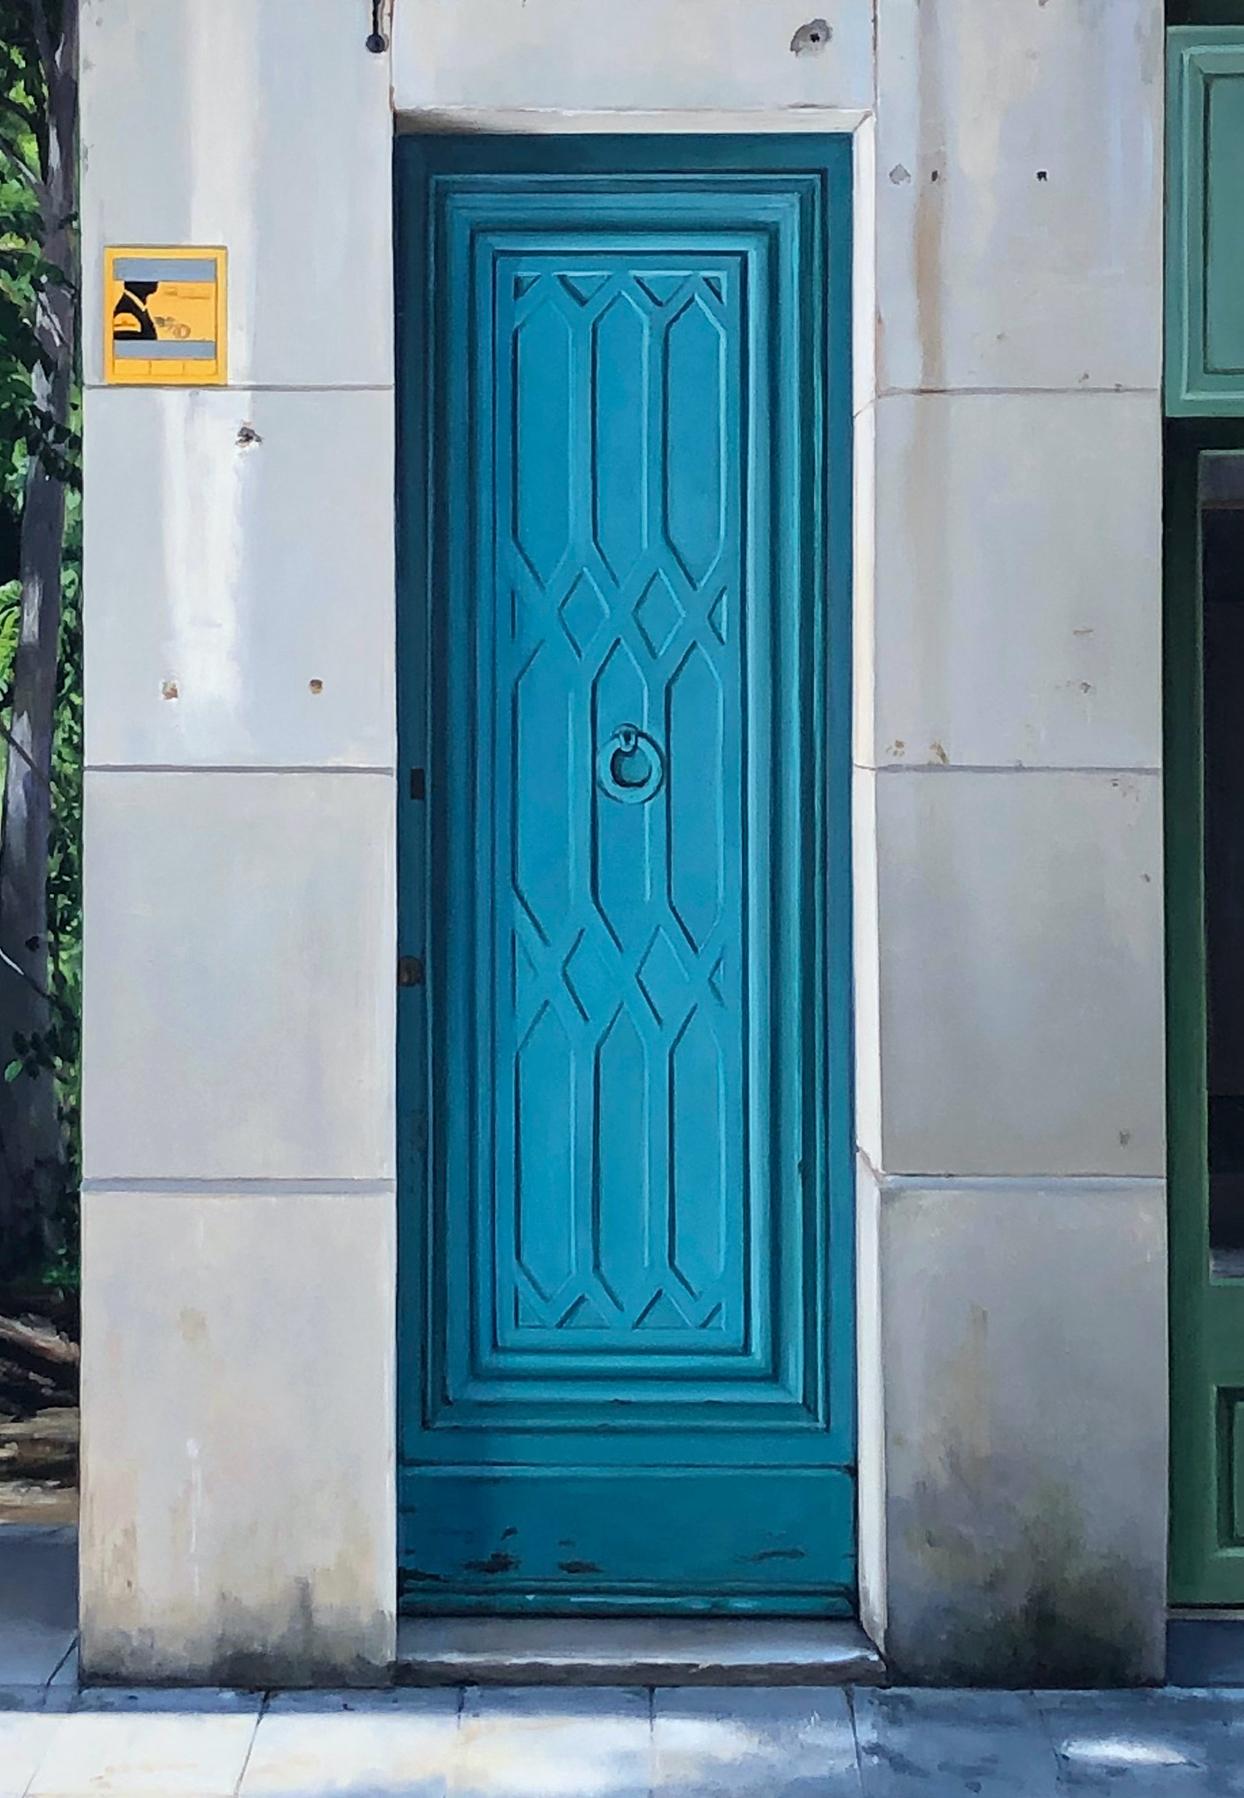 Escapar (To Escape) - Architectural Imagery, Doorways and Lush Tropical Scene - Contemporary Painting by Carol Pylant